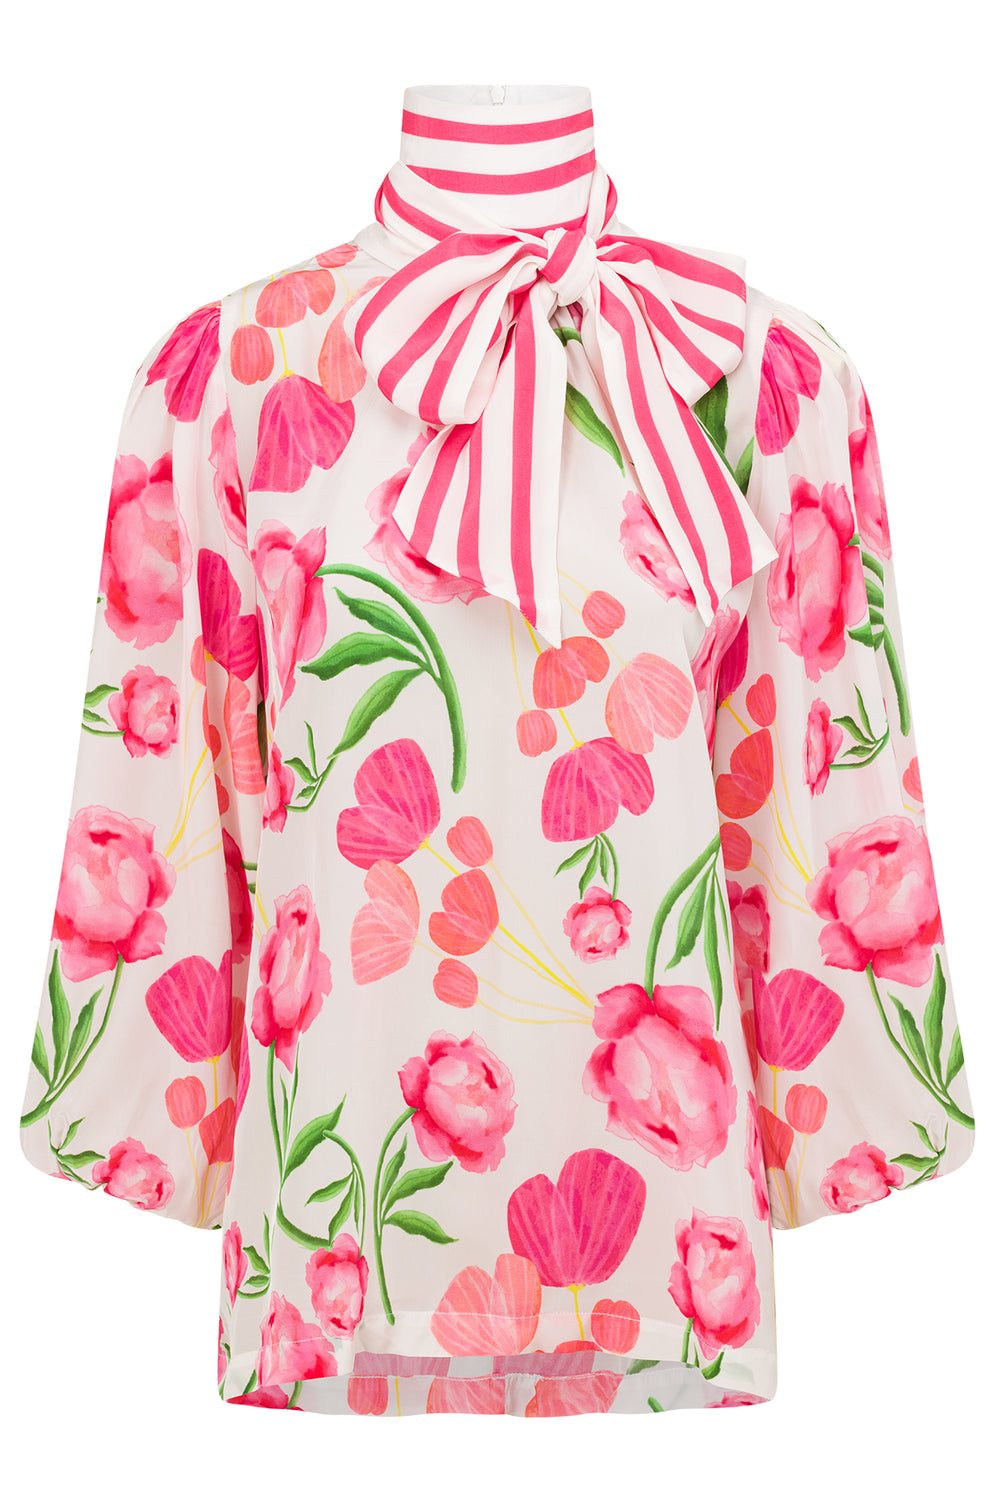  The Poppies & Peonies Blouse by Bonita Collective